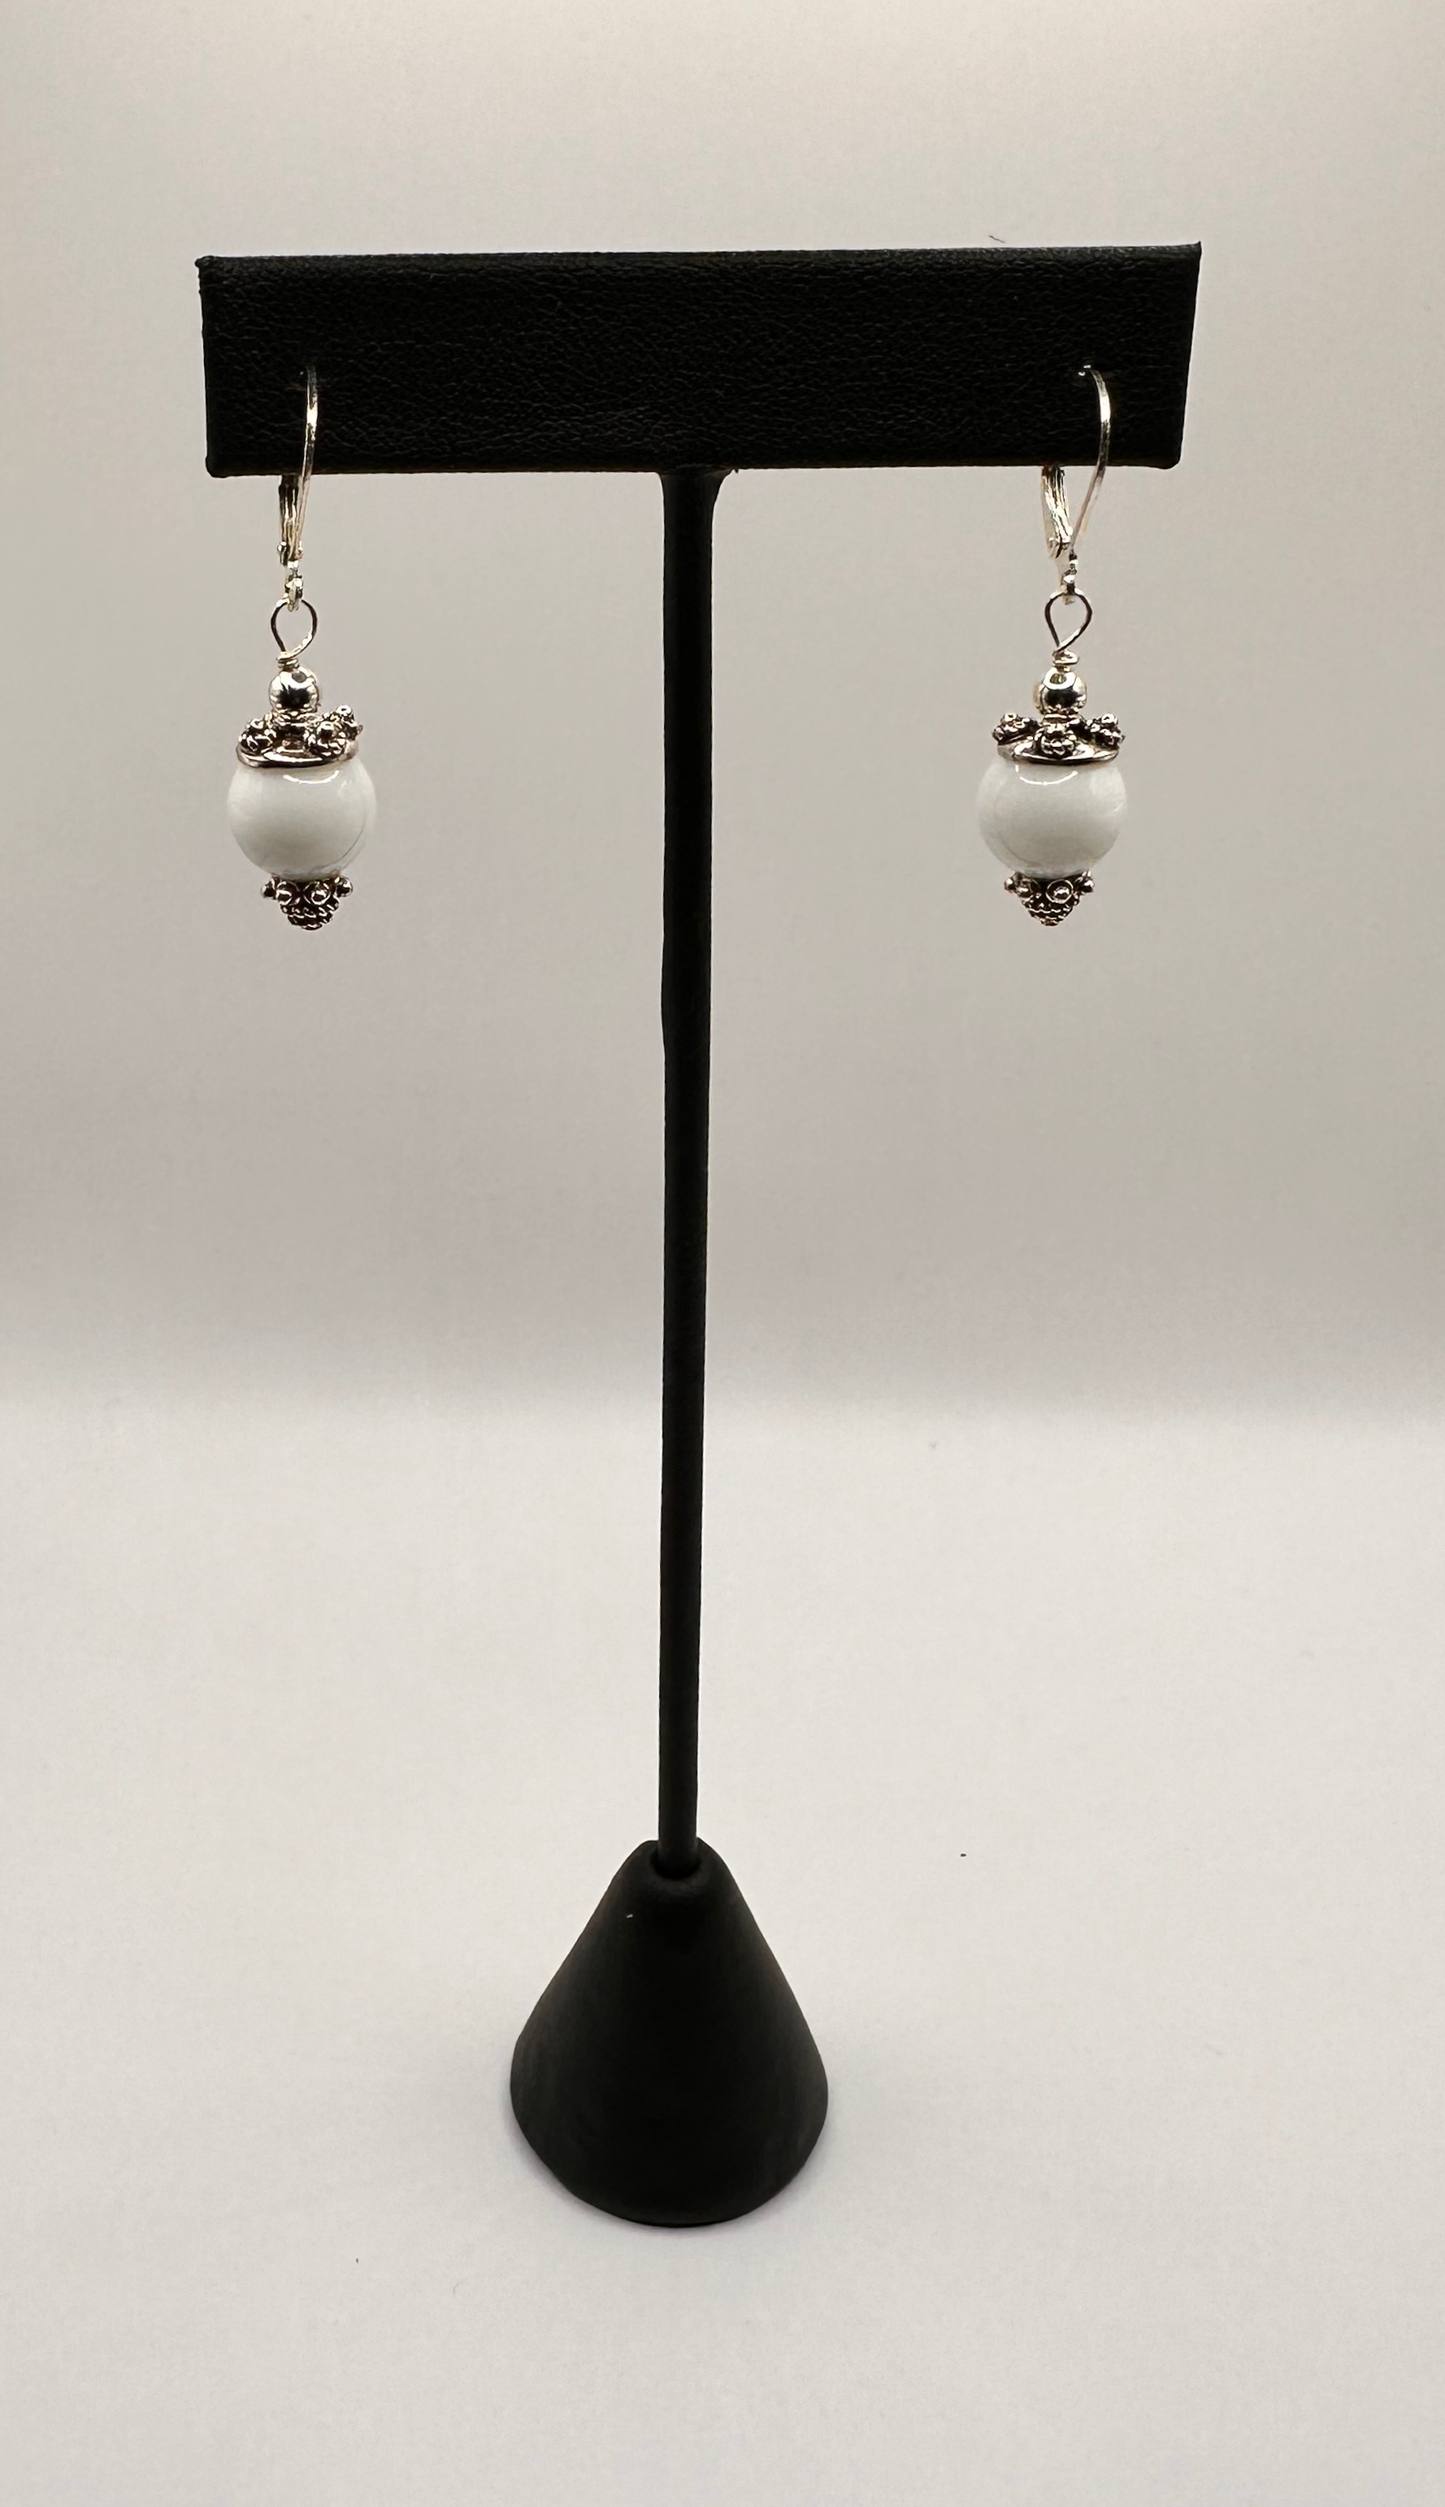 White Onyx Bead with Accent Sterling Silver Bead Earrings